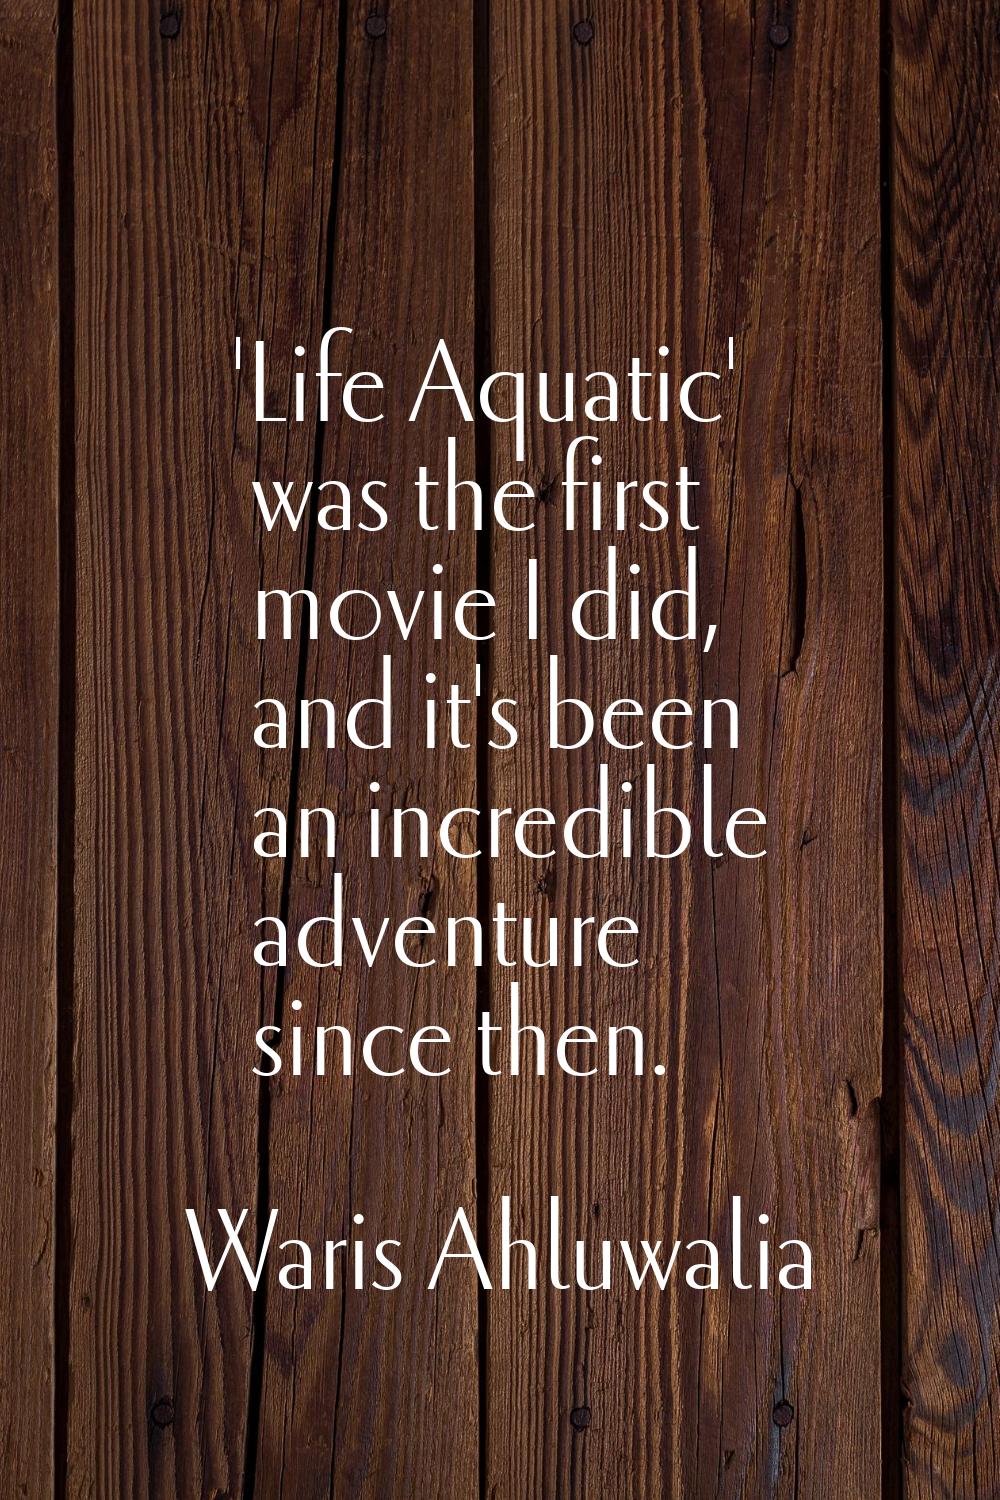 'Life Aquatic' was the first movie I did, and it's been an incredible adventure since then.